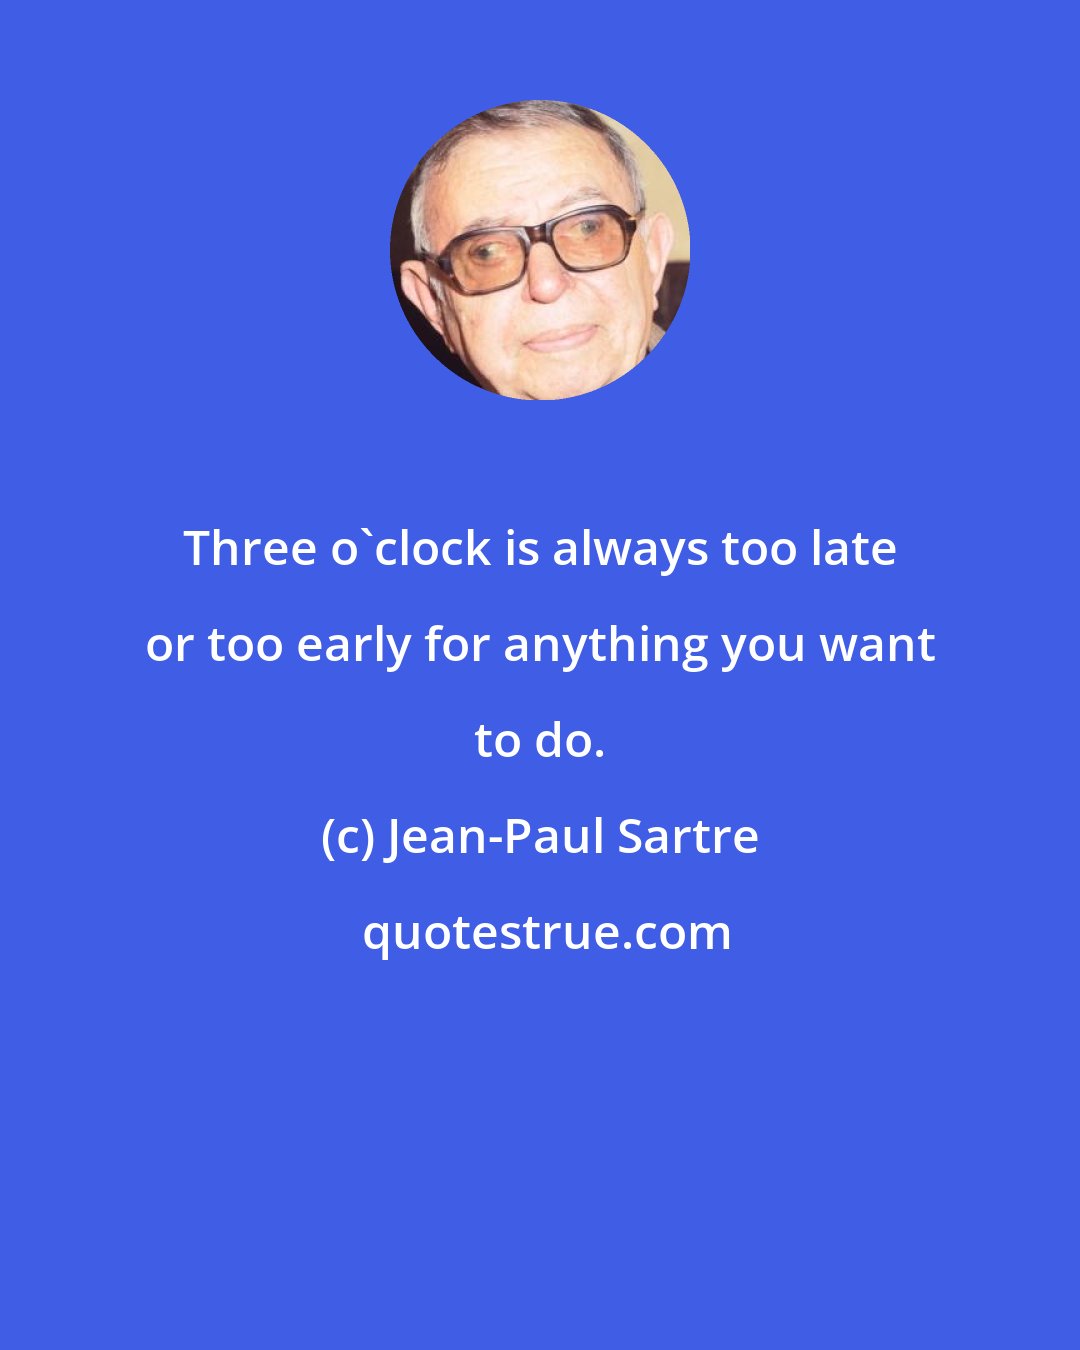 Jean-Paul Sartre: Three o'clock is always too late or too early for anything you want to do.